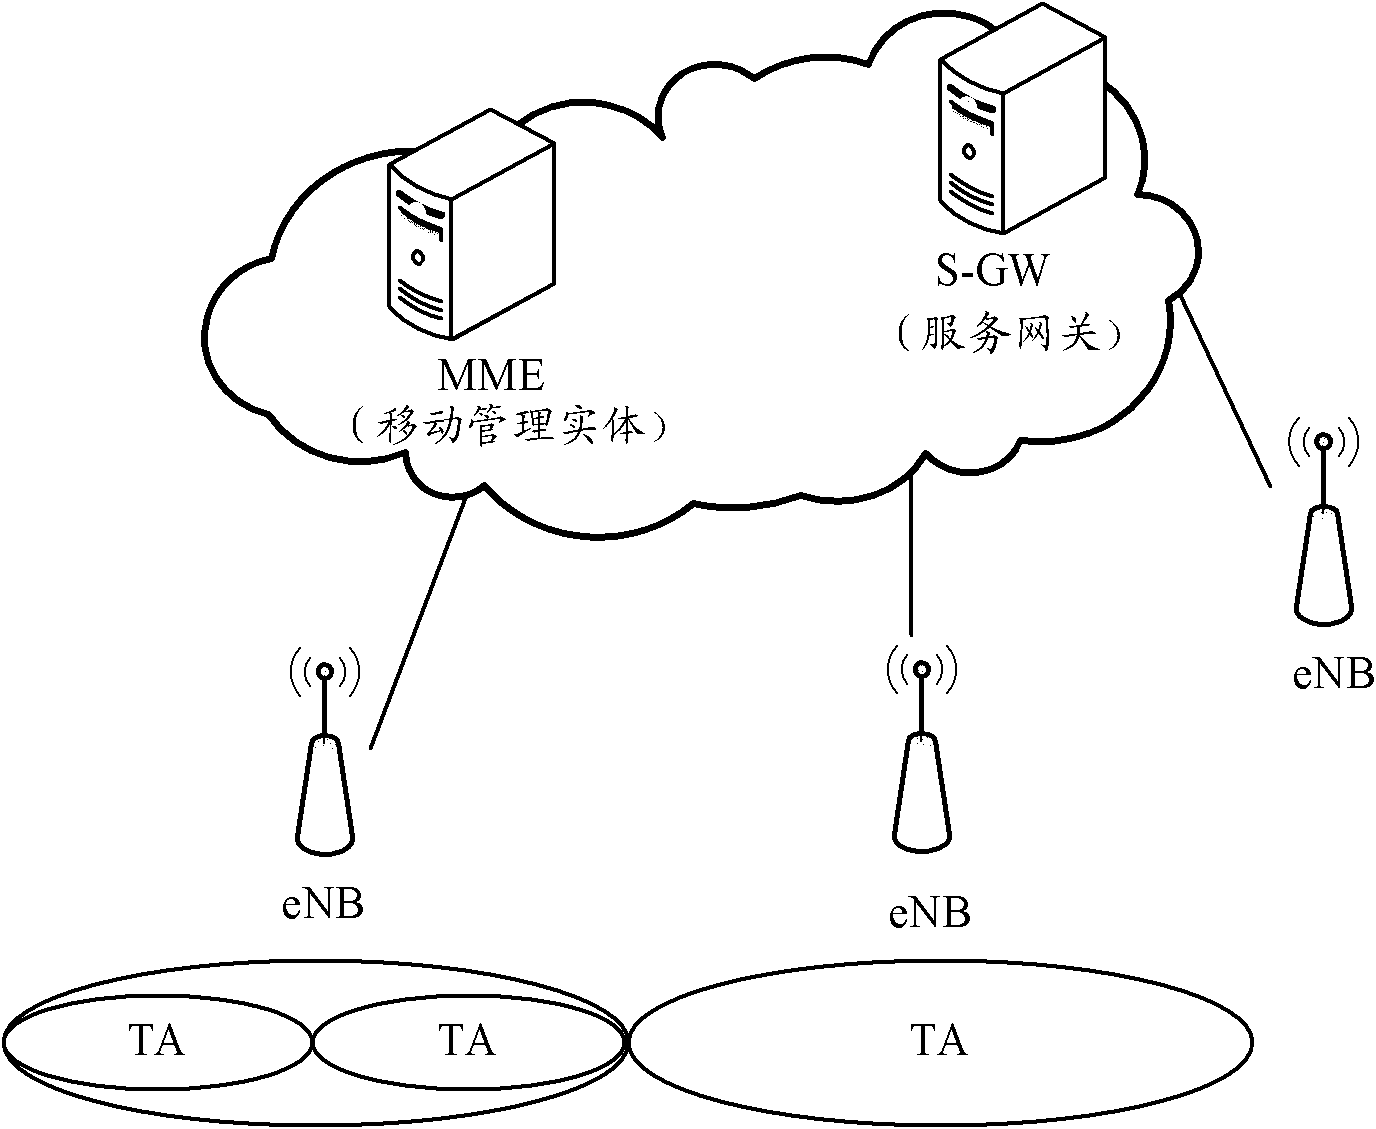 Method and device for replanning TA (Tracking Area)